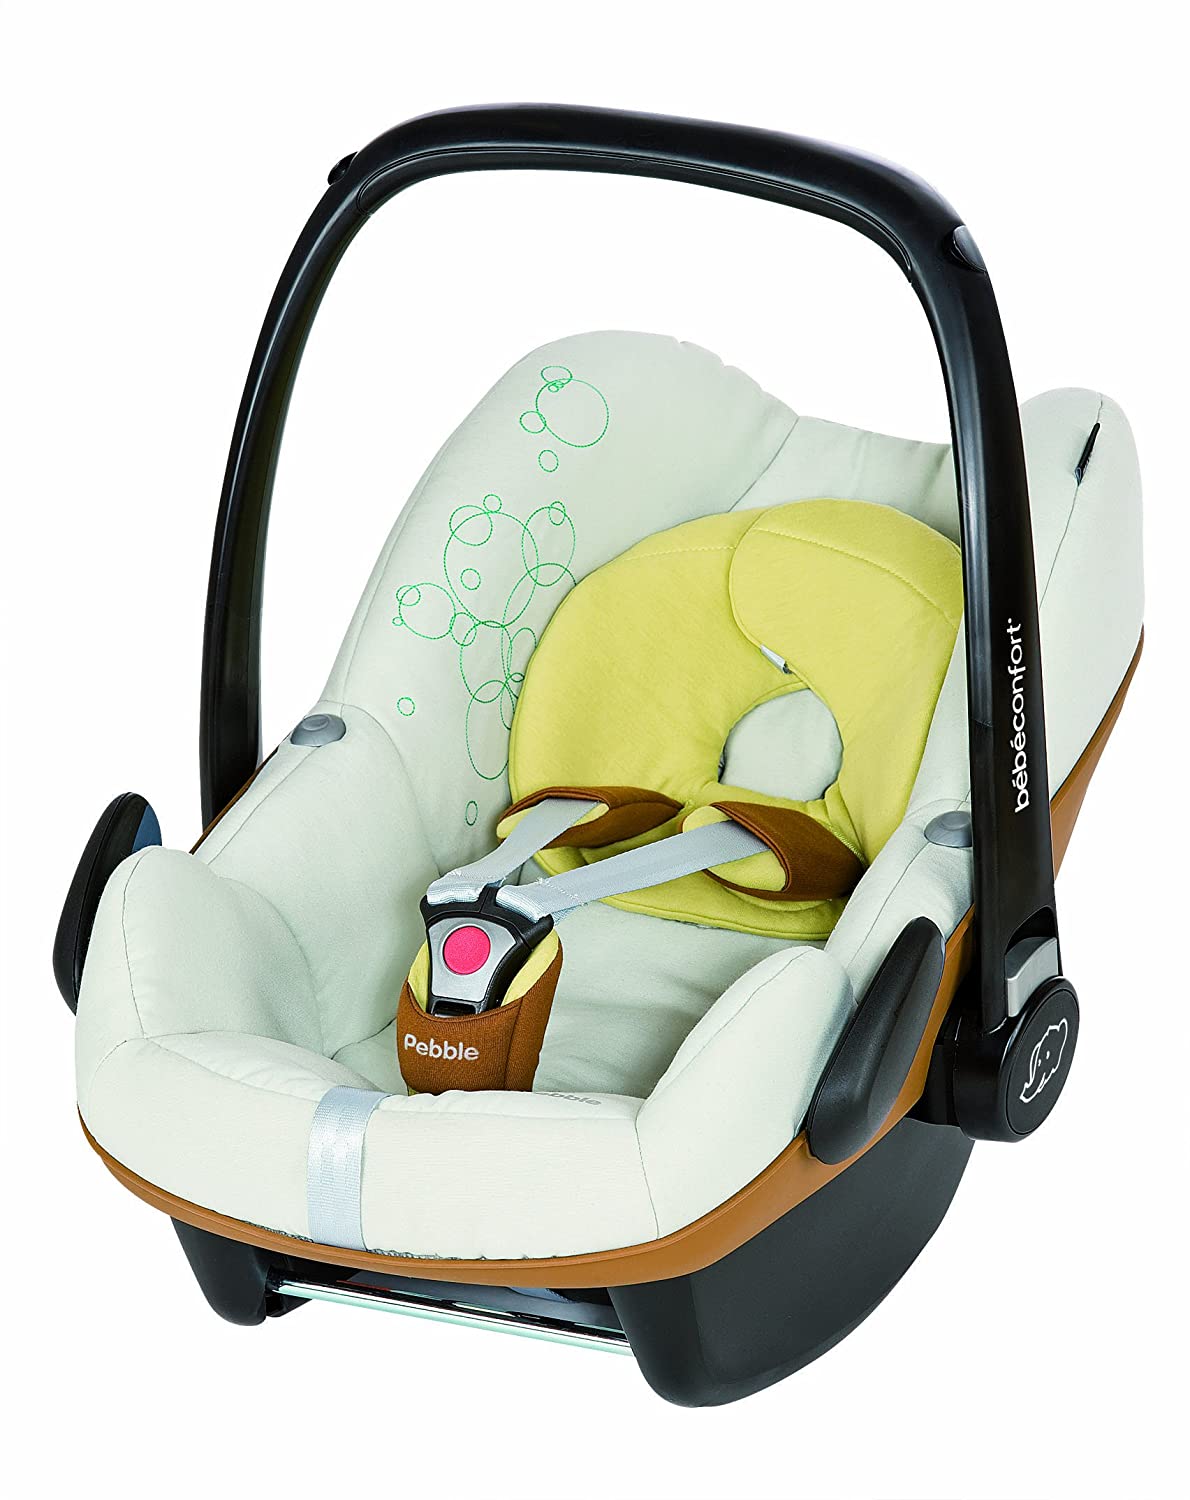 BEBE CONFORT Maxi Cosi – Quinny Pebble Grey Car Seat Group 0, 0 + (Up To 13 Kg)